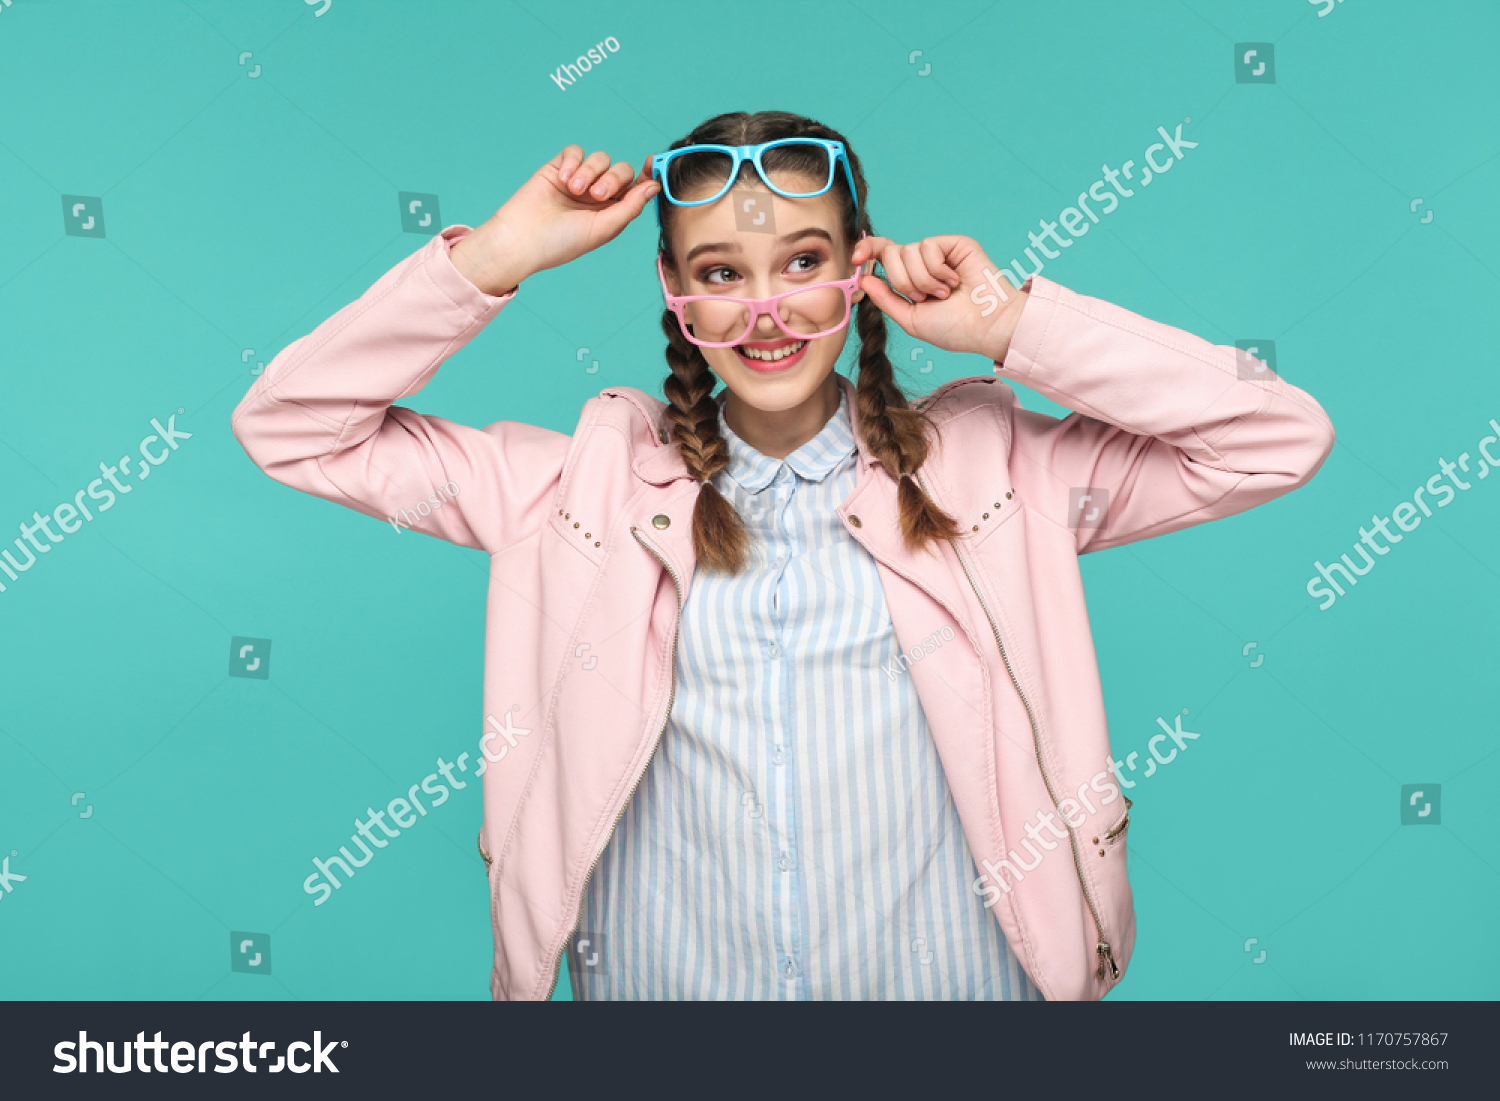 Happy funny girl in casual or hipster style, pigtail hairstyle, standing, holding two blue and pink glasses and looking away with toothy smile, Indoor studio shot, isolated on blue or green background #1170757867